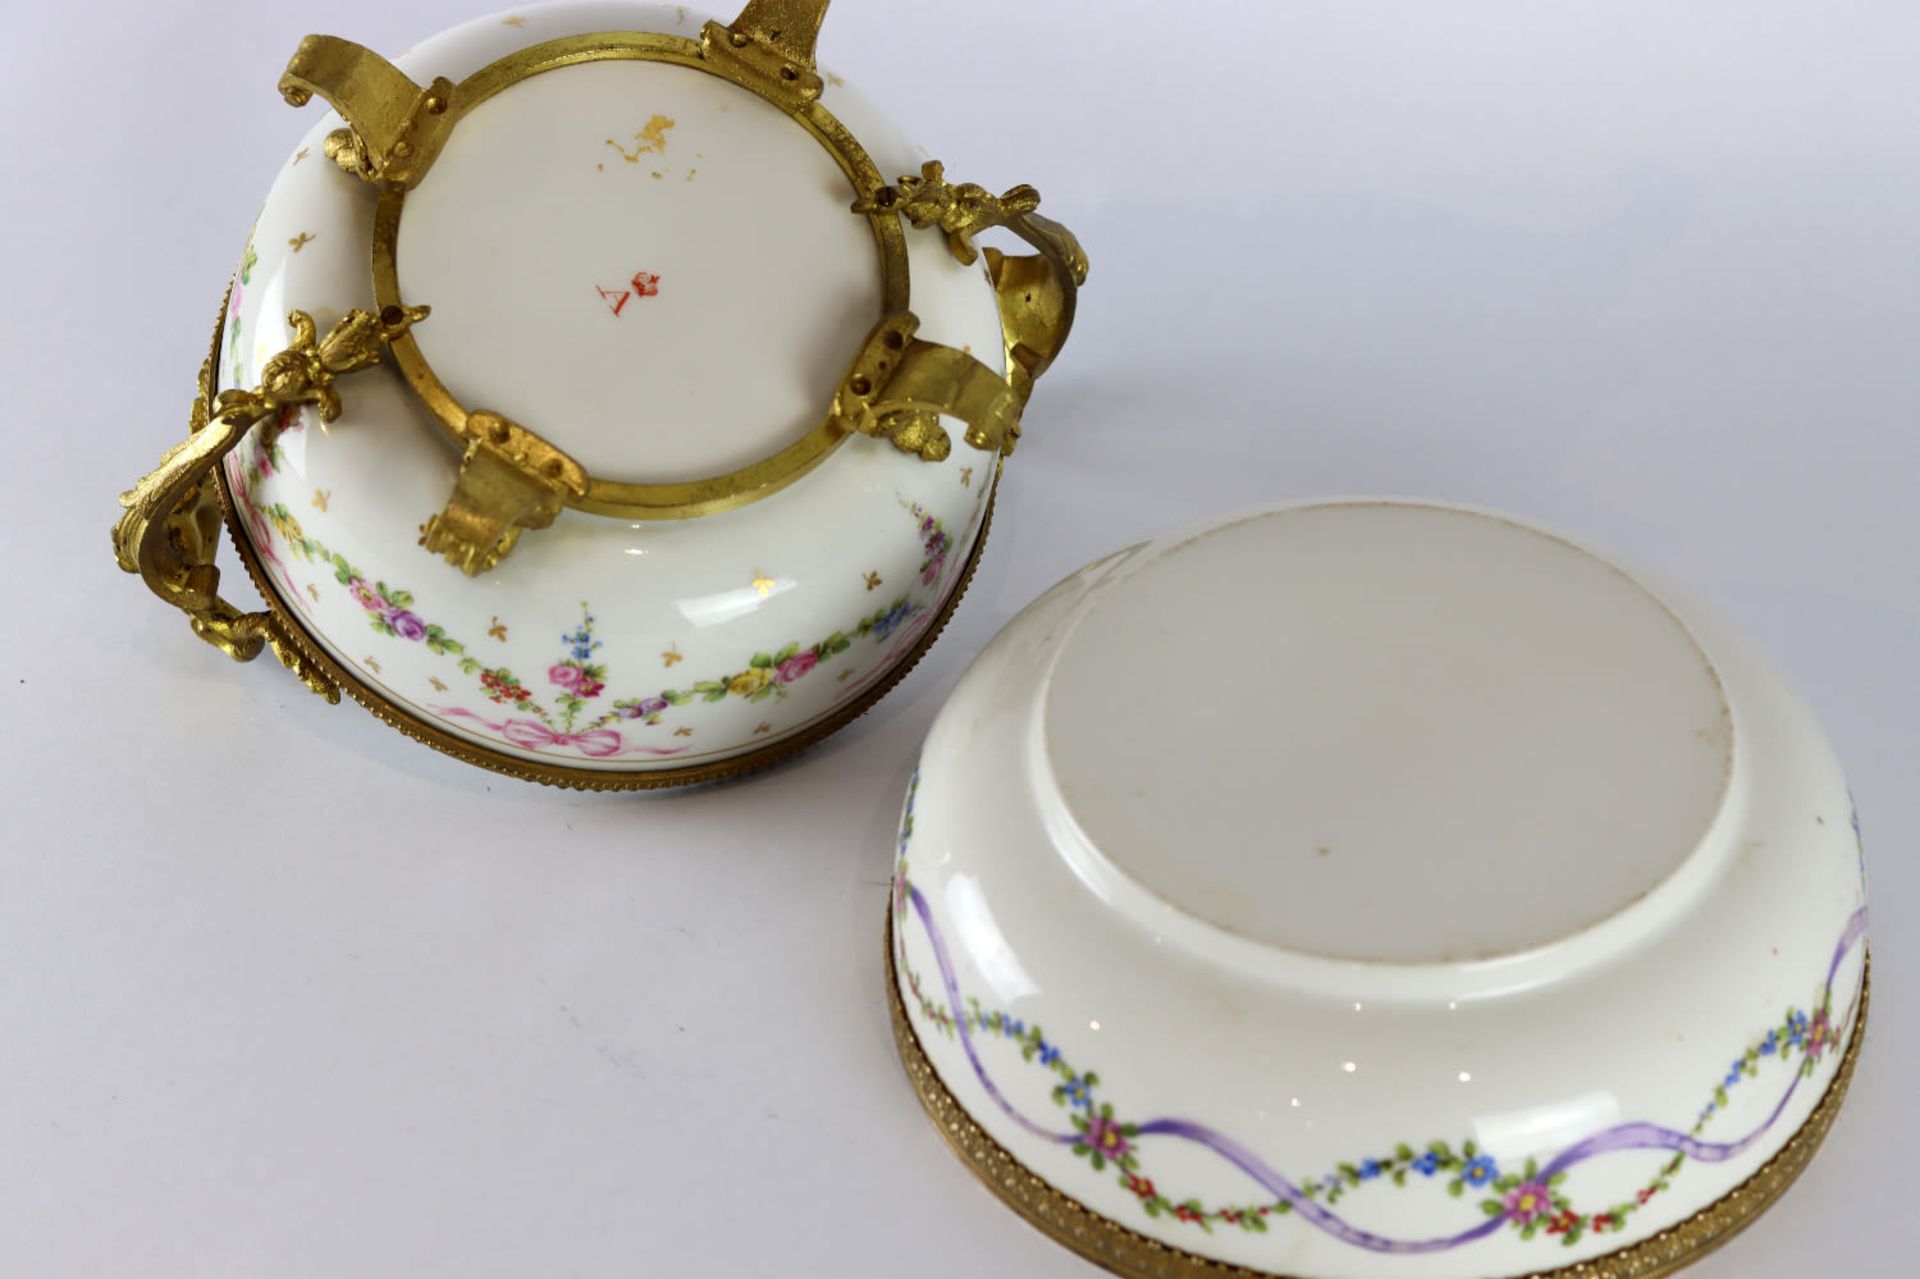 A pair of French ormolu-mounted porcelain comport, 19th Century - Image 10 of 11